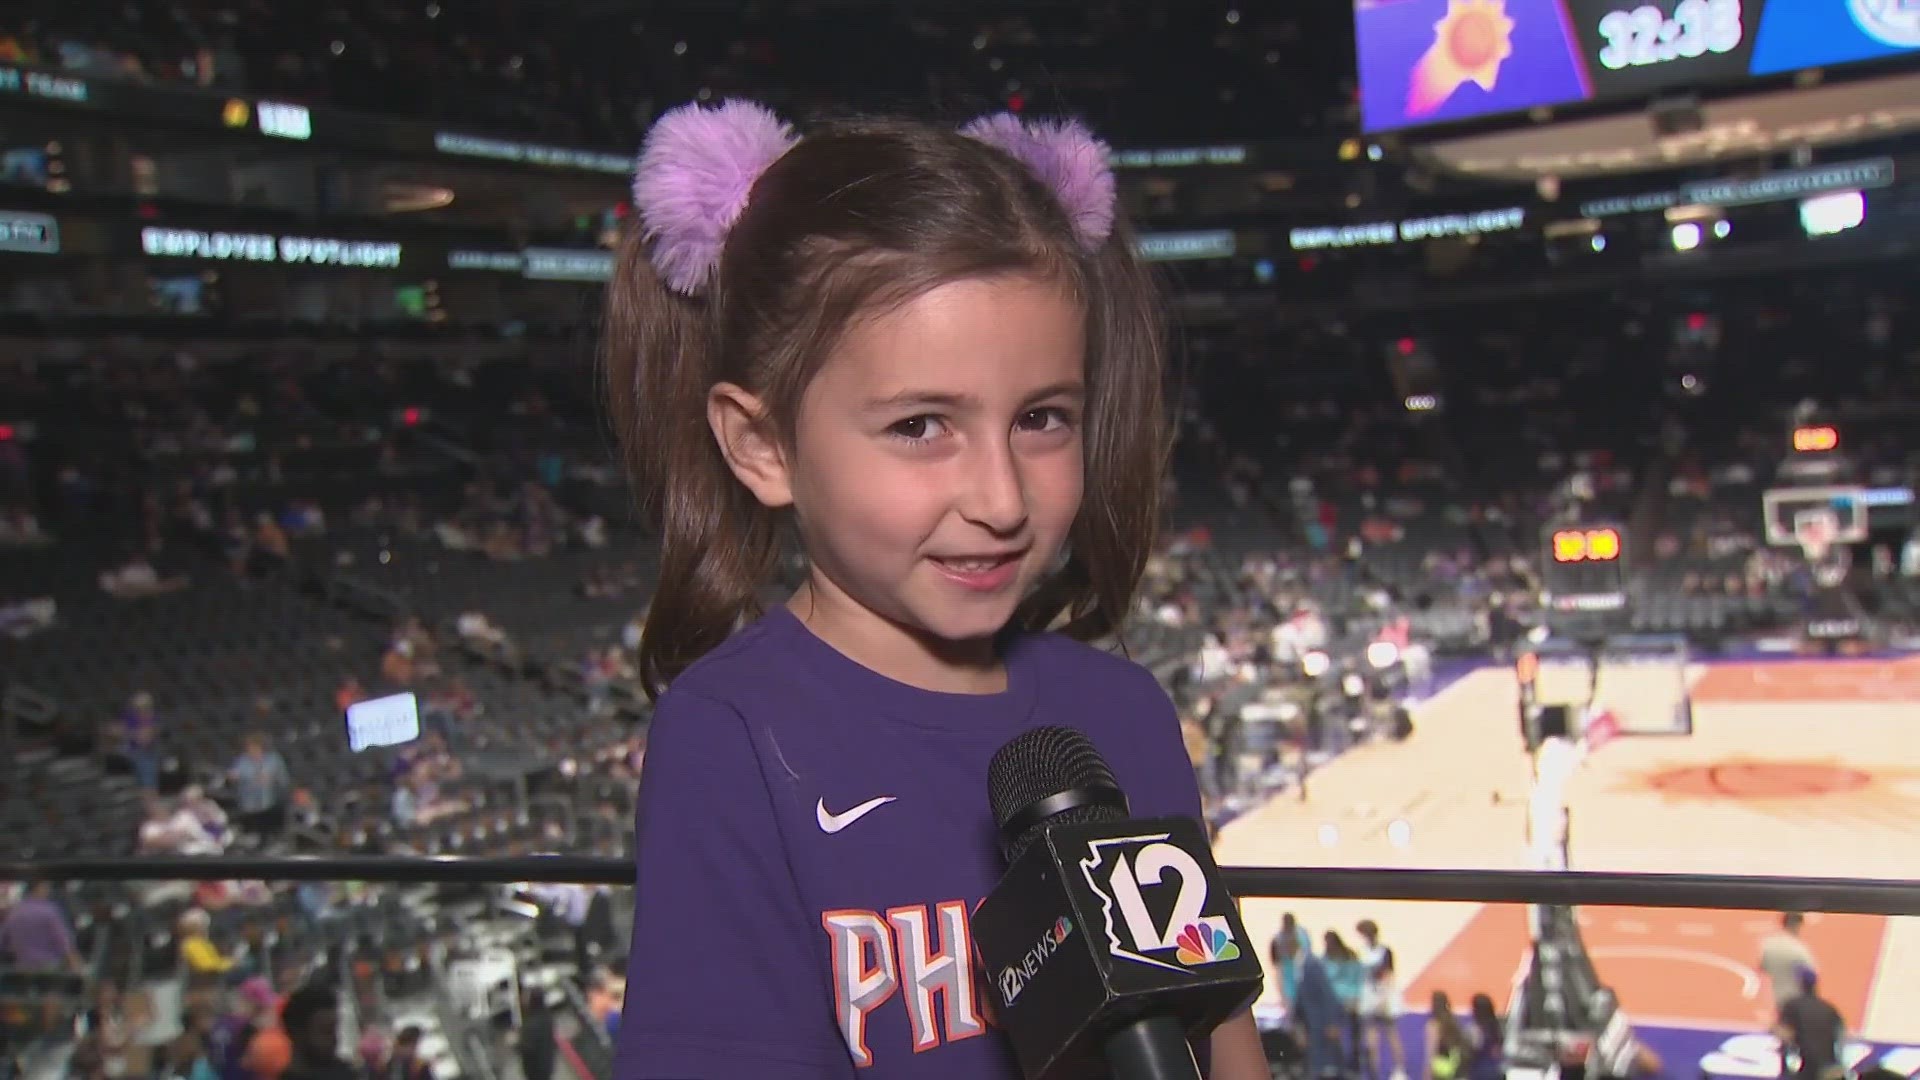 This Valley girl didn't want princess tiaras for her birthday, she wanted Suns gear. 12Sports shares her story.